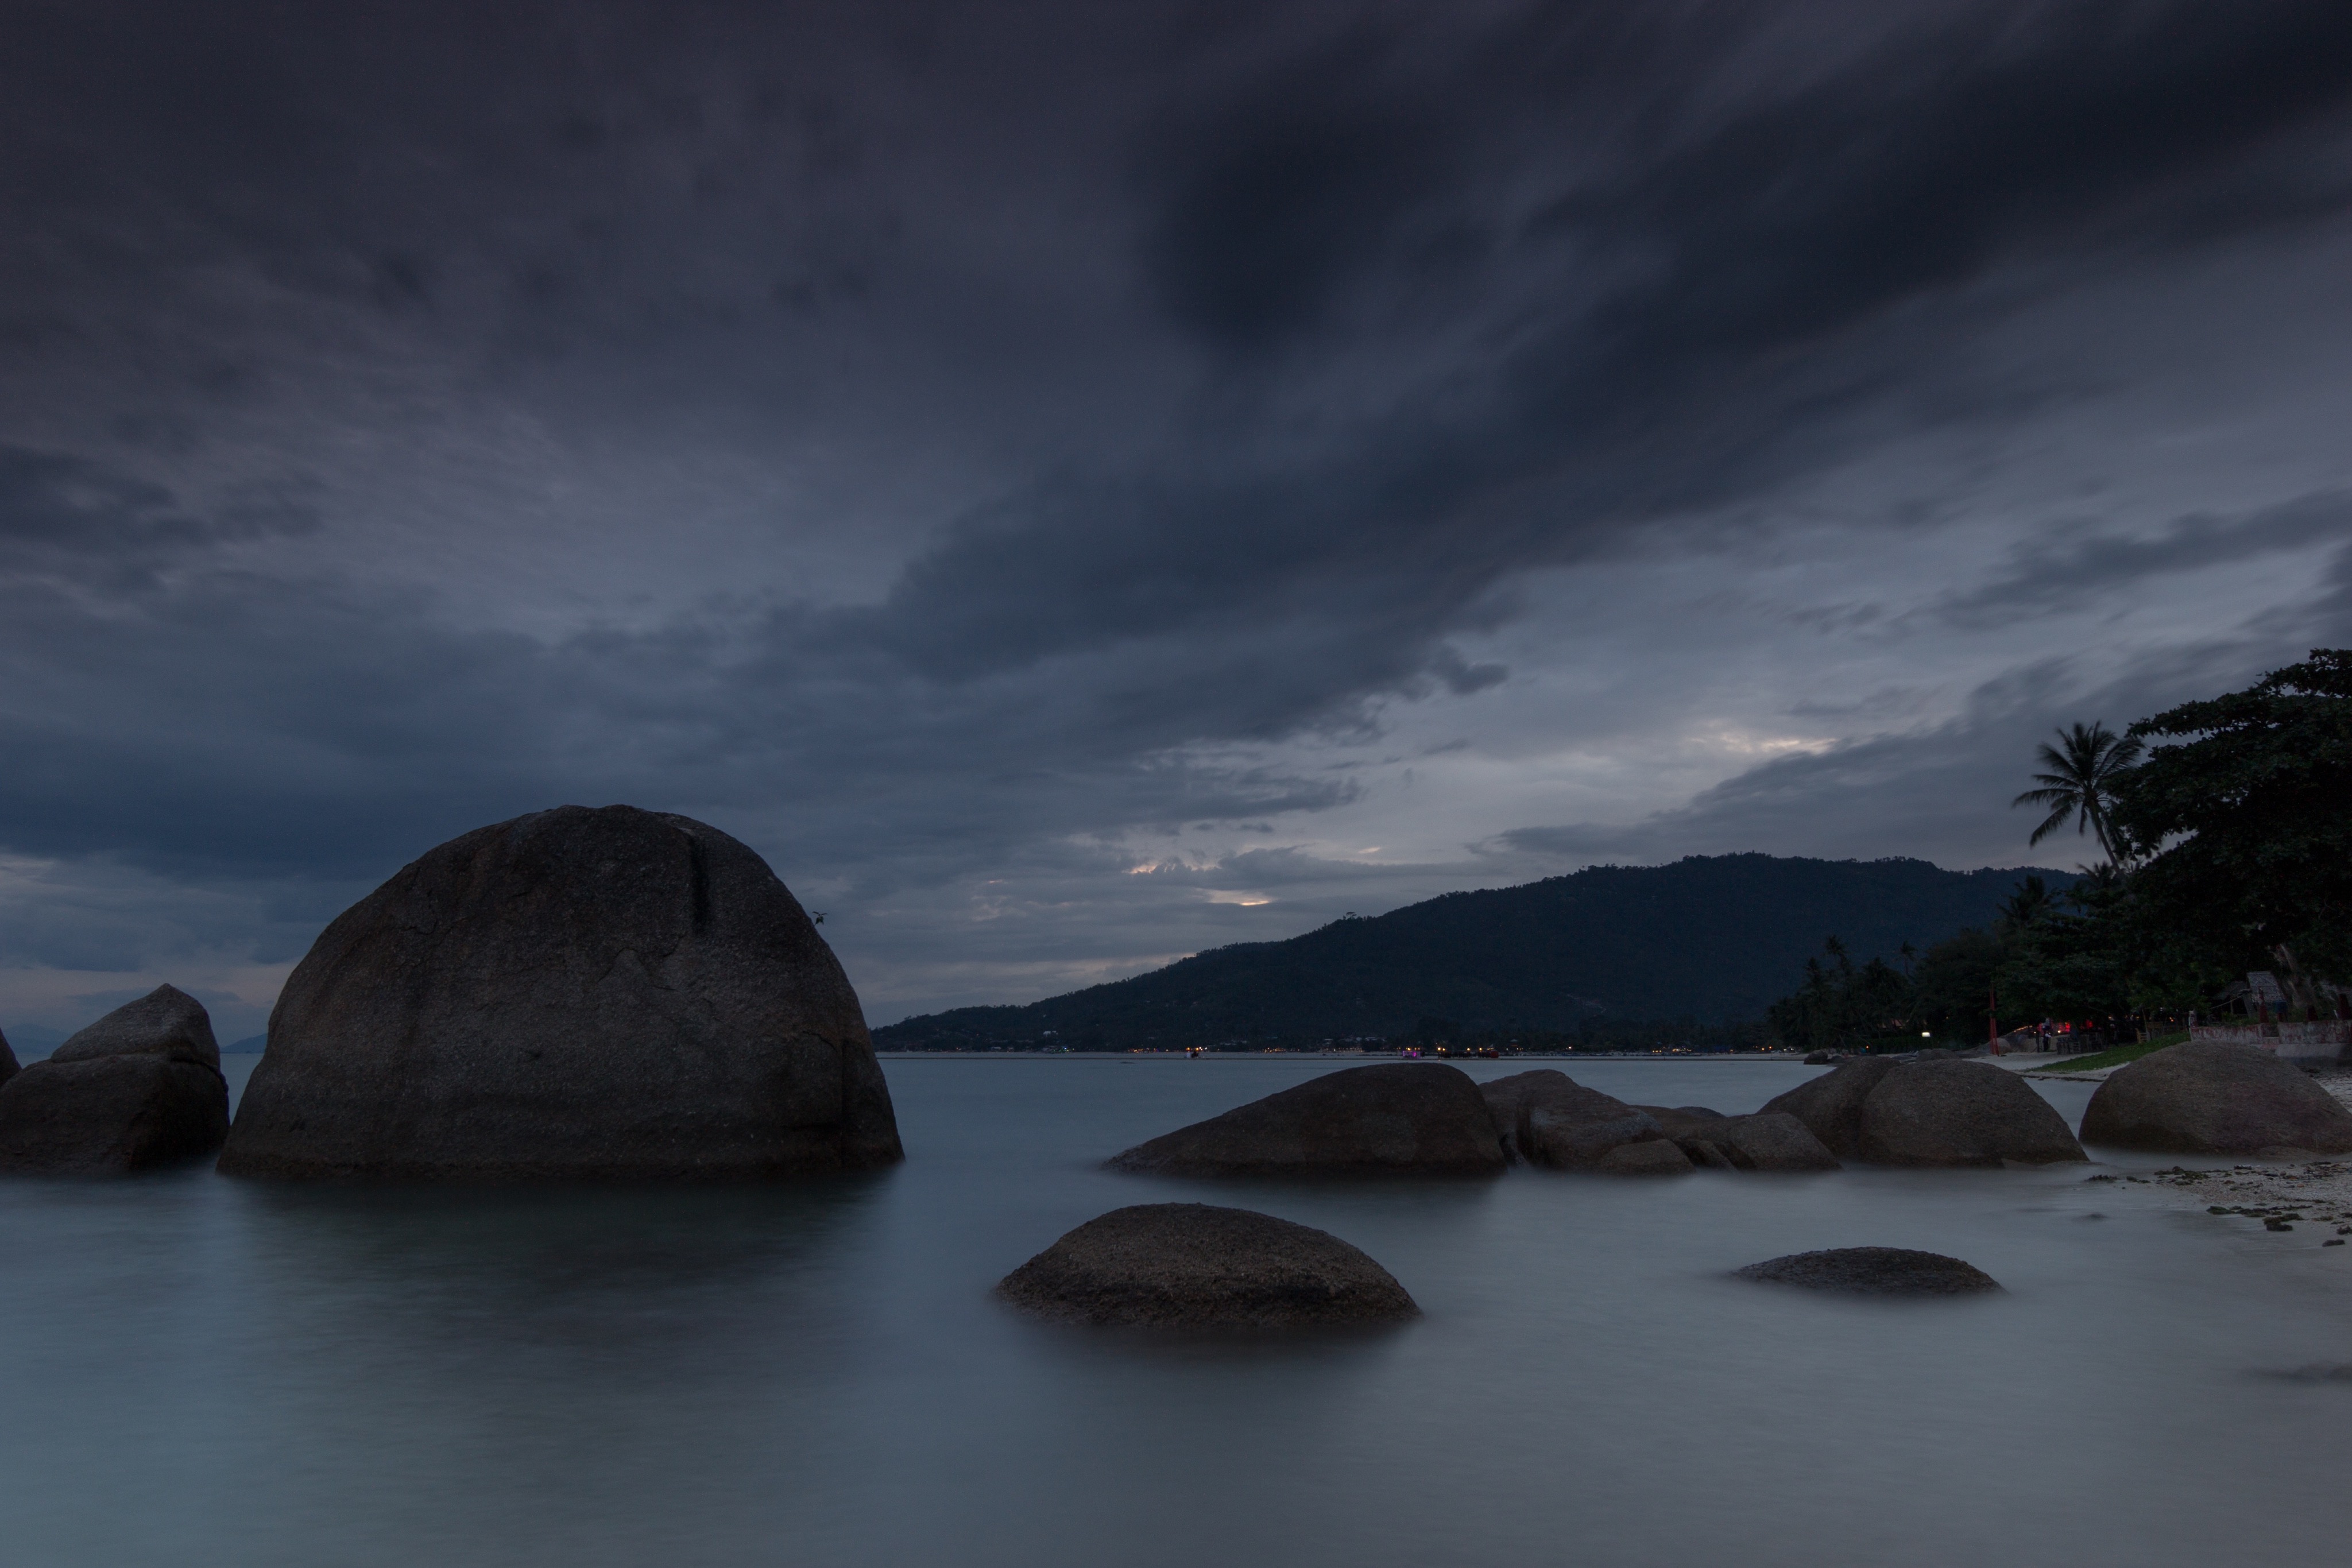 1st Image: Landscape without the moon. 13 sec | f/9 | ISO 100